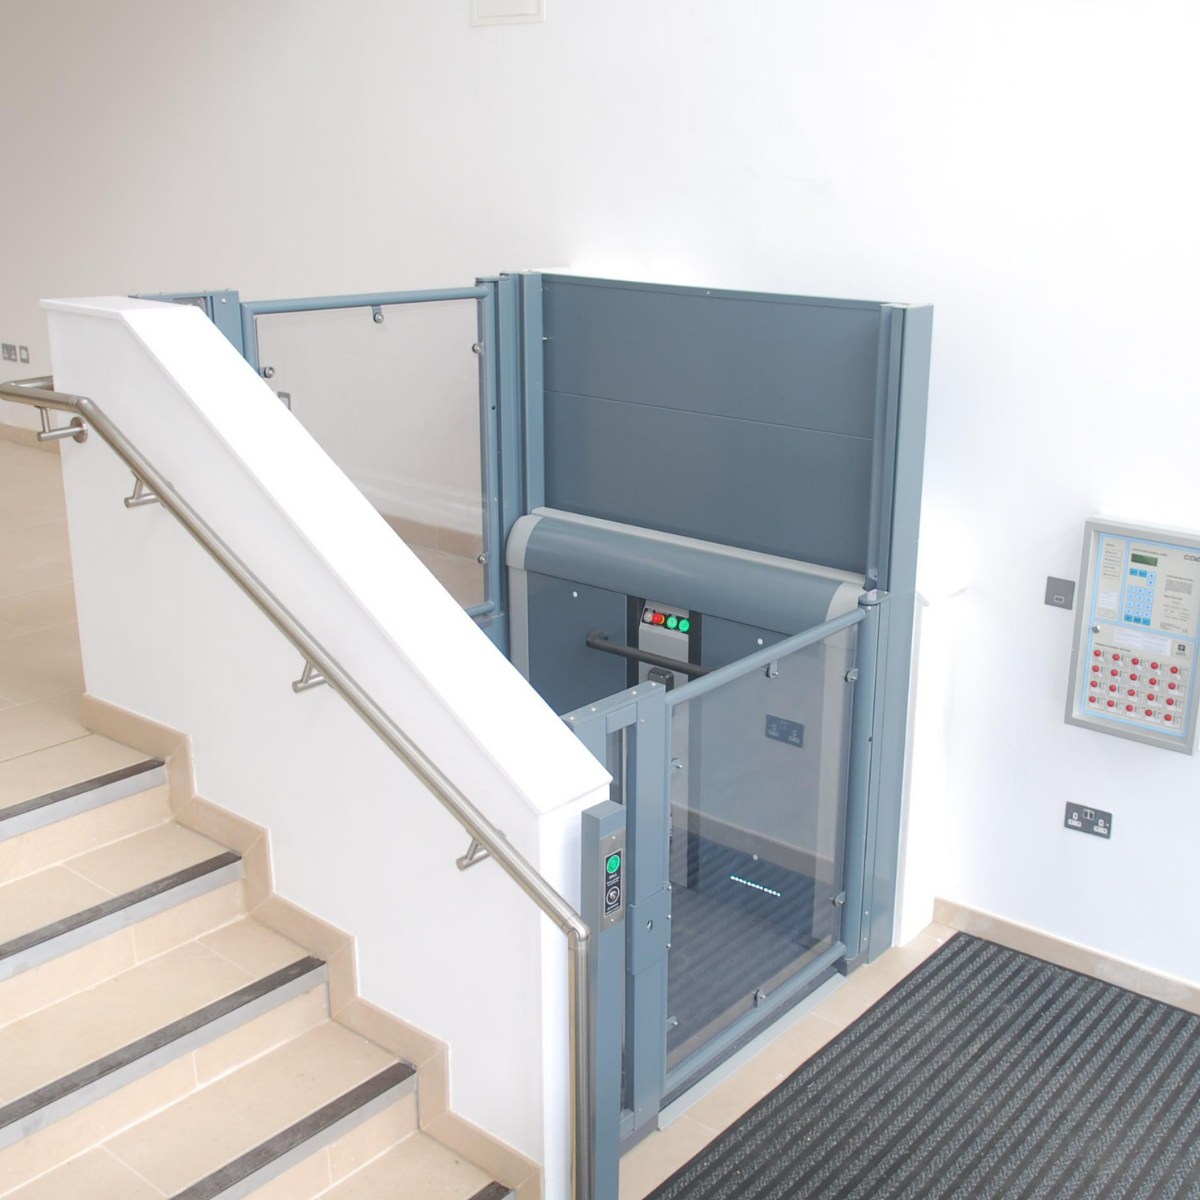 Stannah Lowriser platform step lift Stannah Lifts & Stairlifts South Midlands & Home Counties Service Branch Brackley 01280 704600